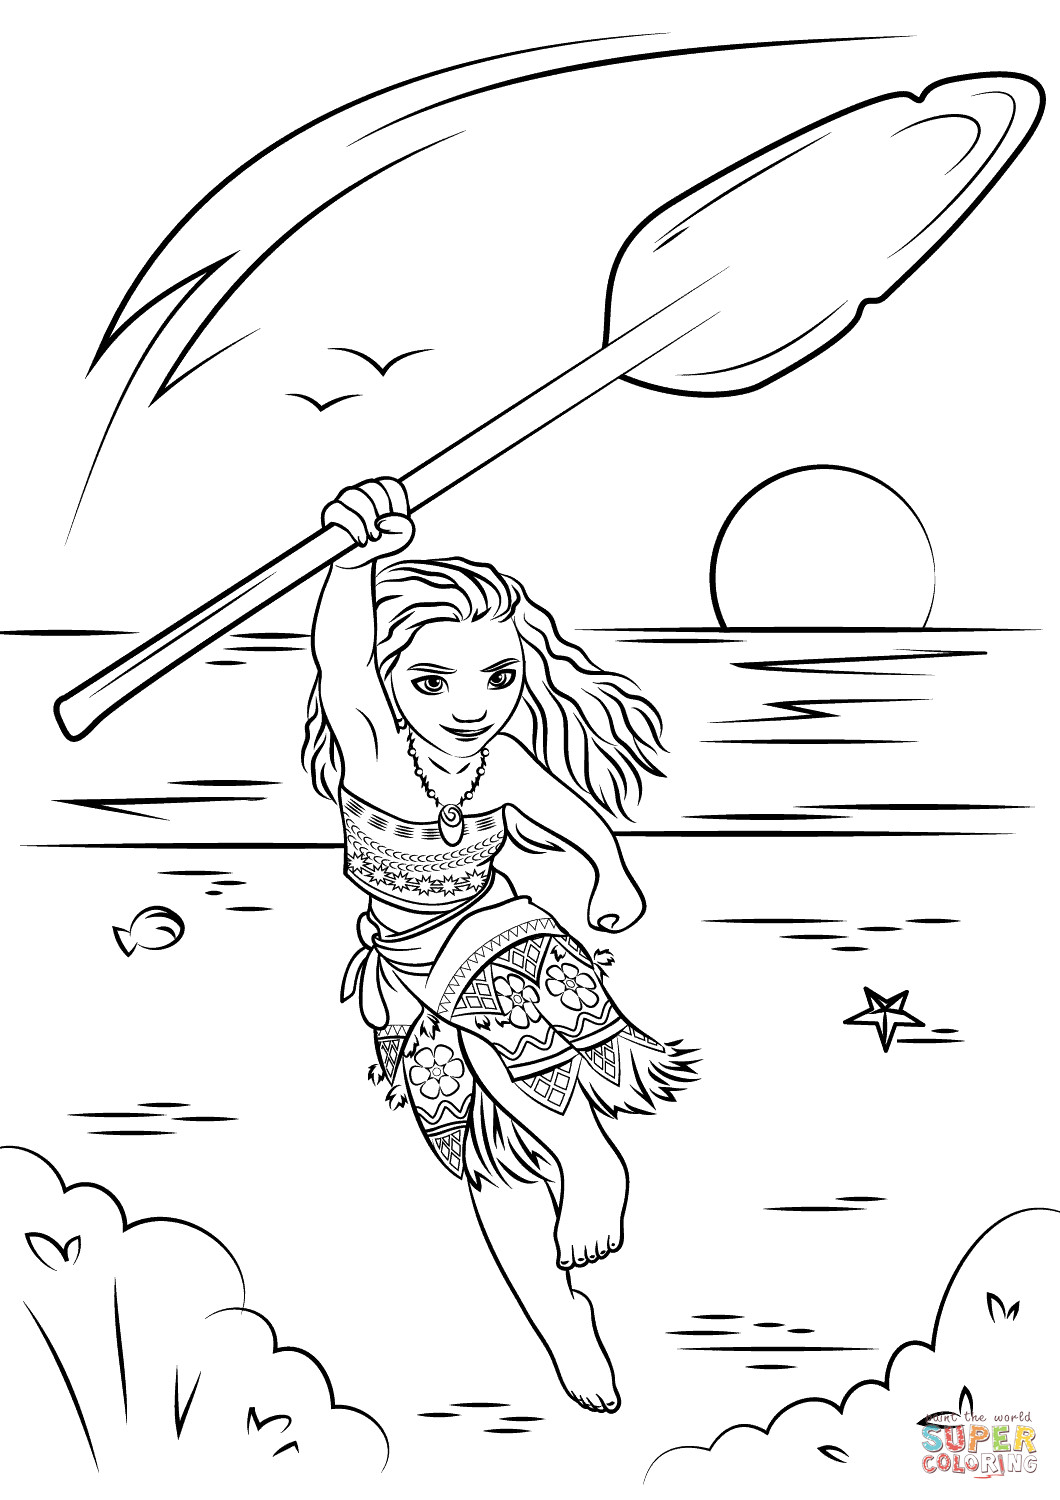 Kids Coloring Pages Moana
 Moana coloring page